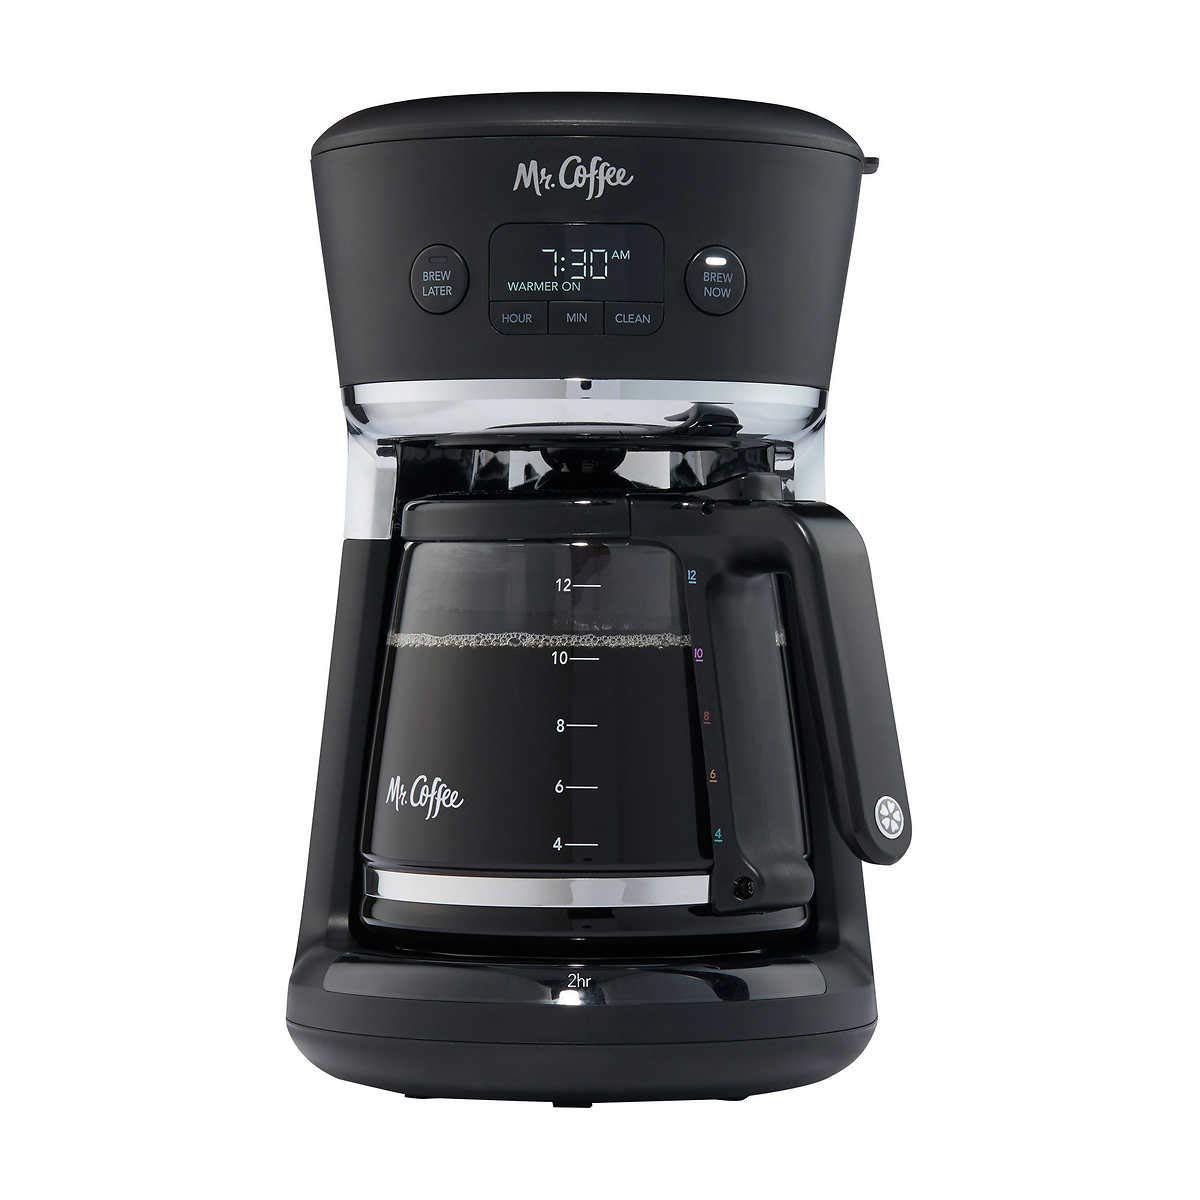 Mr. Coffee Easy Measure 12 cup Programmable Coffee Maker, Water Filtration System - image 1 of 1